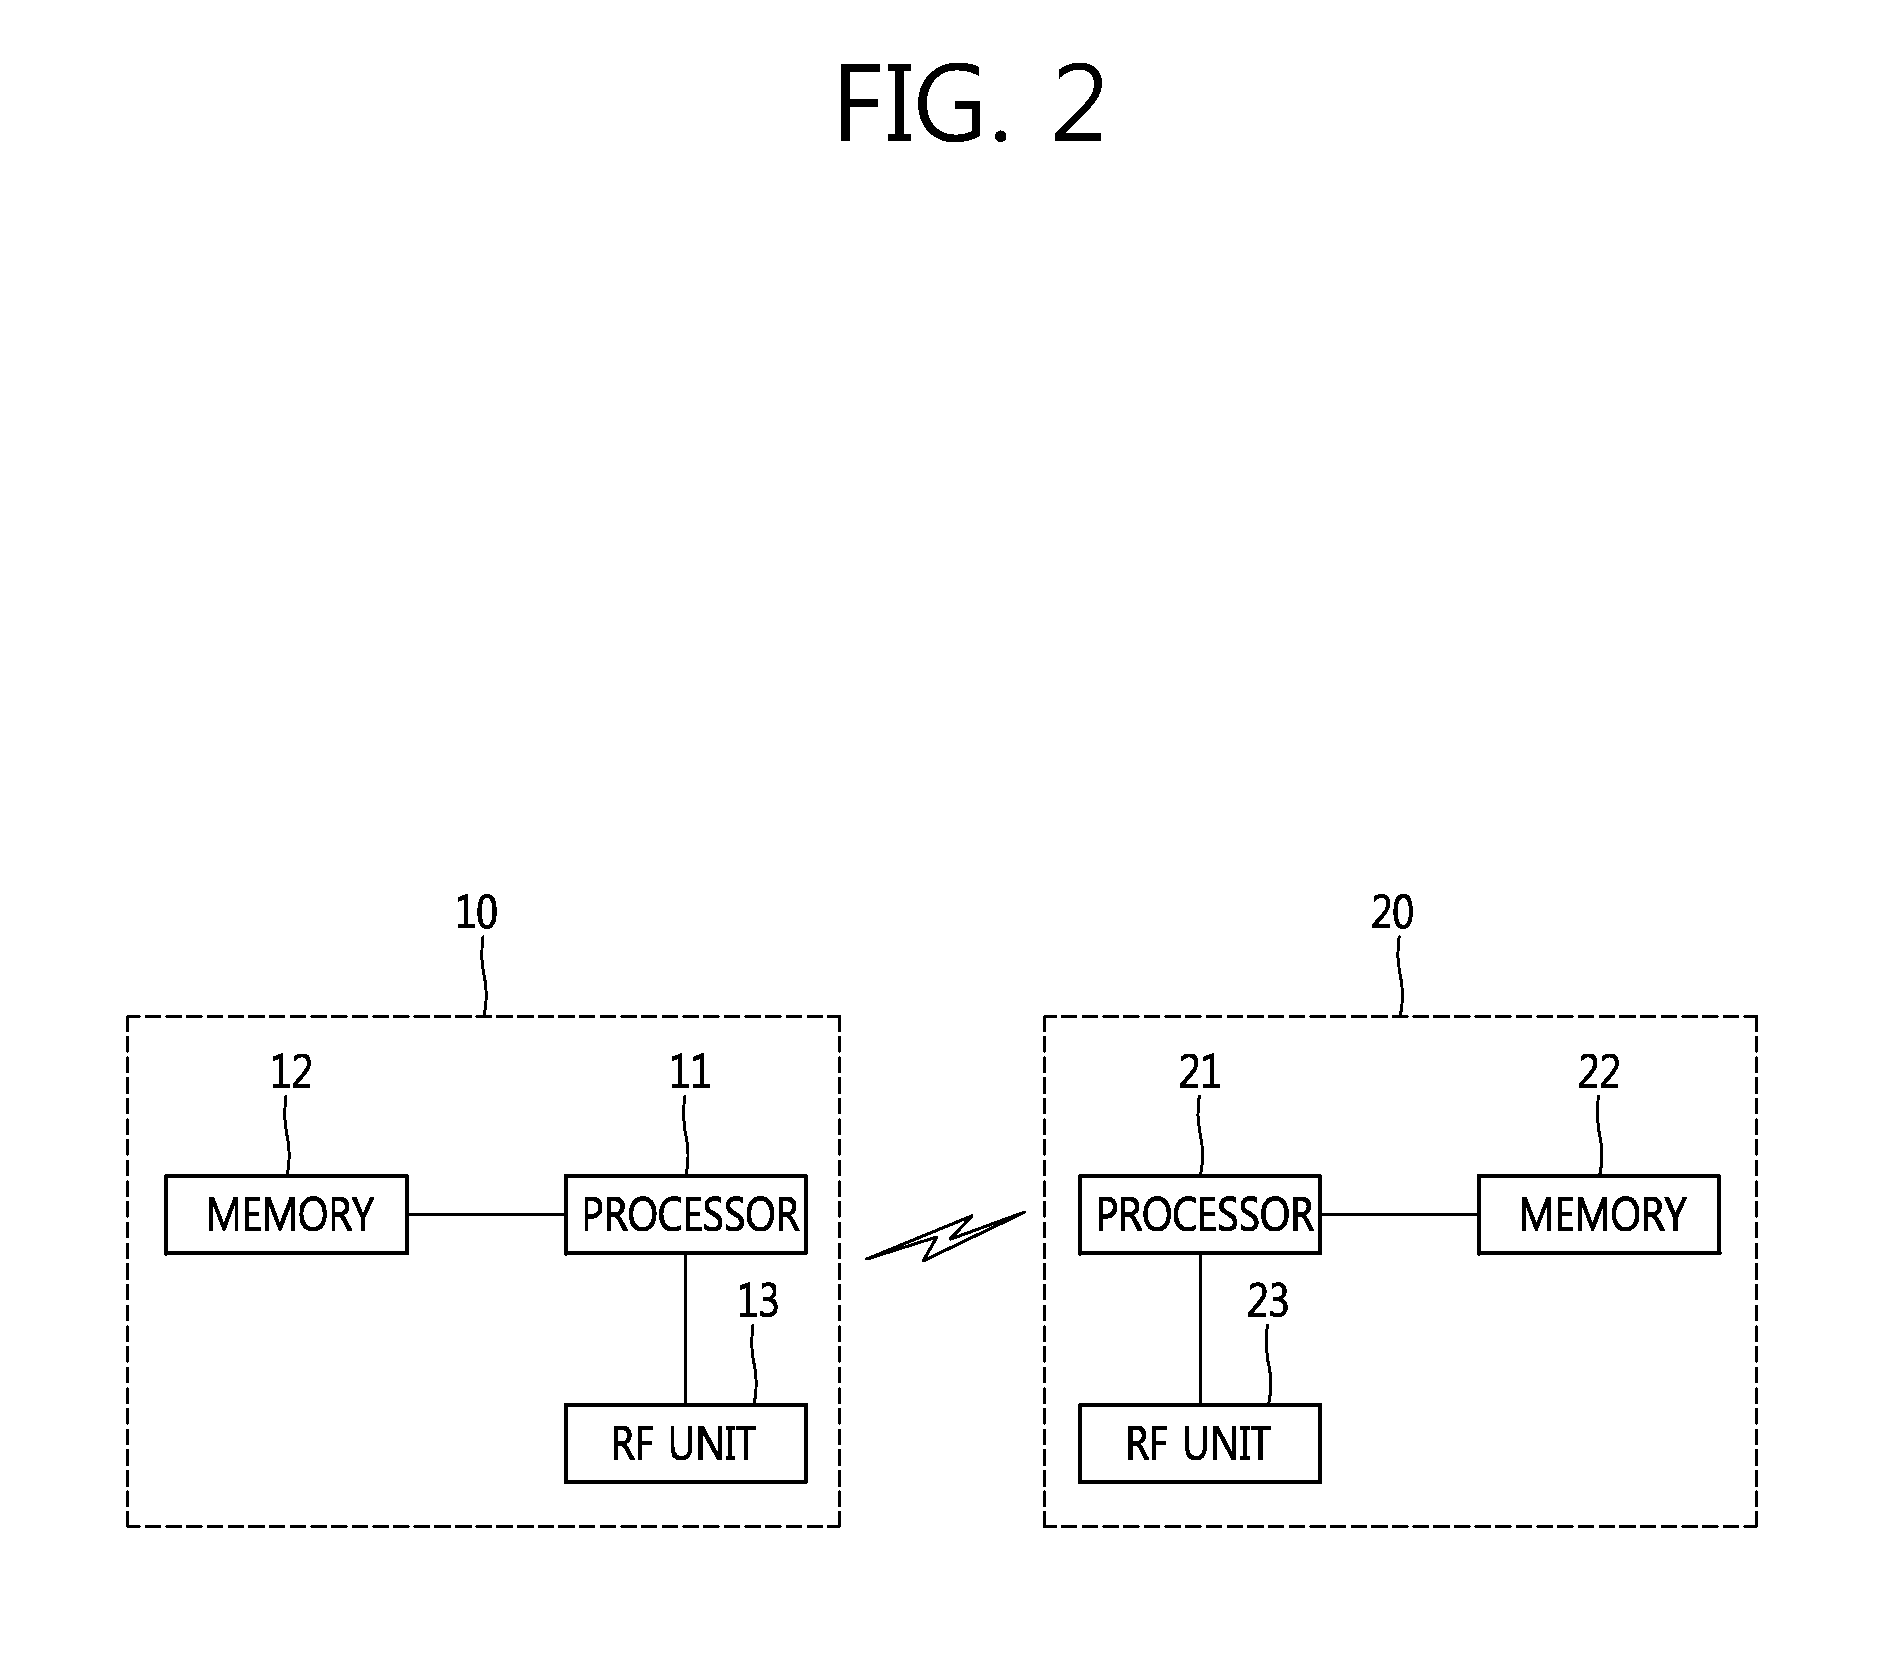 Method and apparatus for allocating device identifiers (STID) in a wireless access system